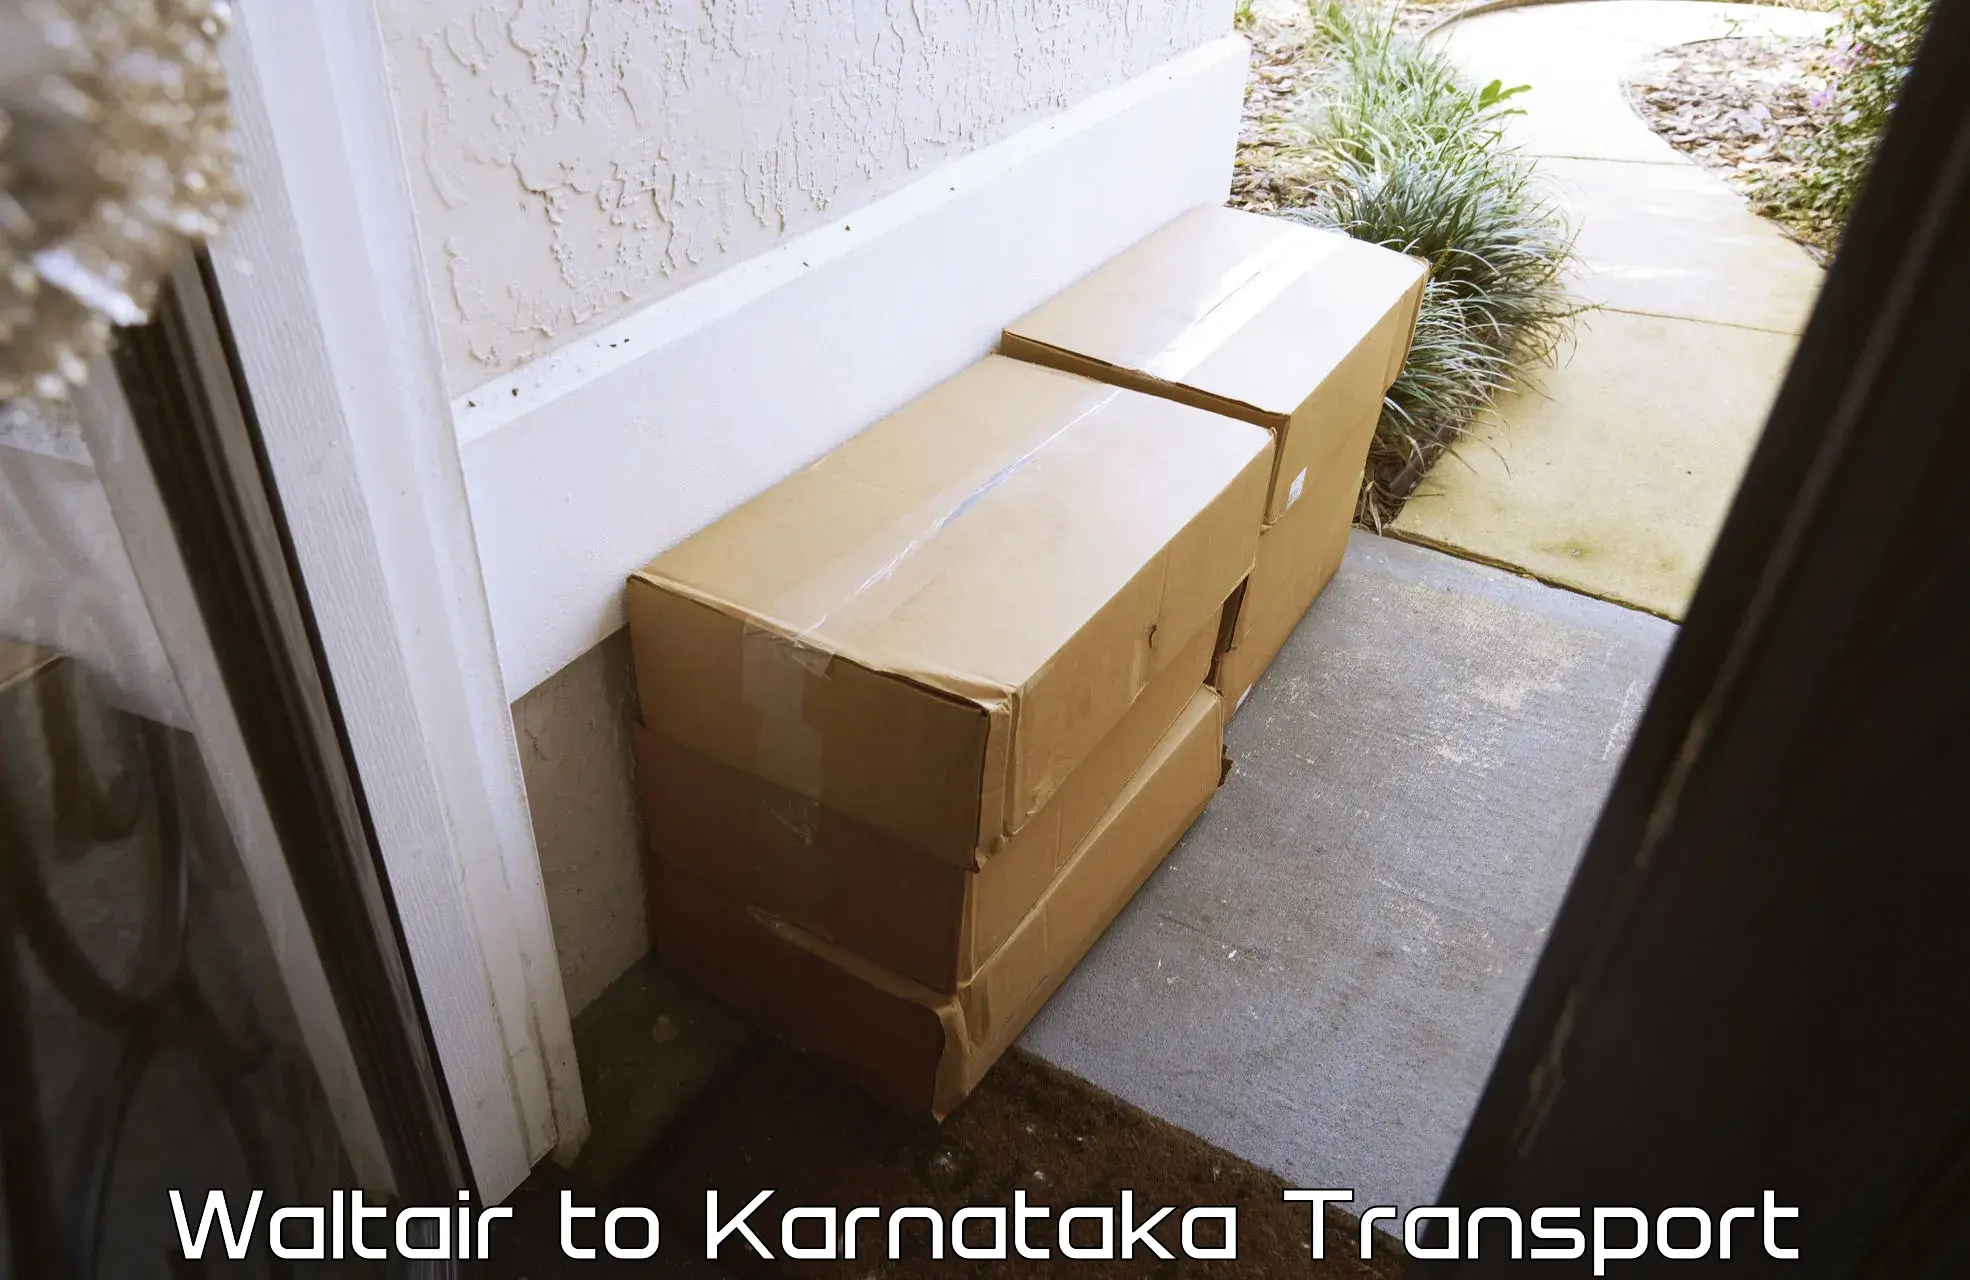 Delivery service in Waltair to Karnataka